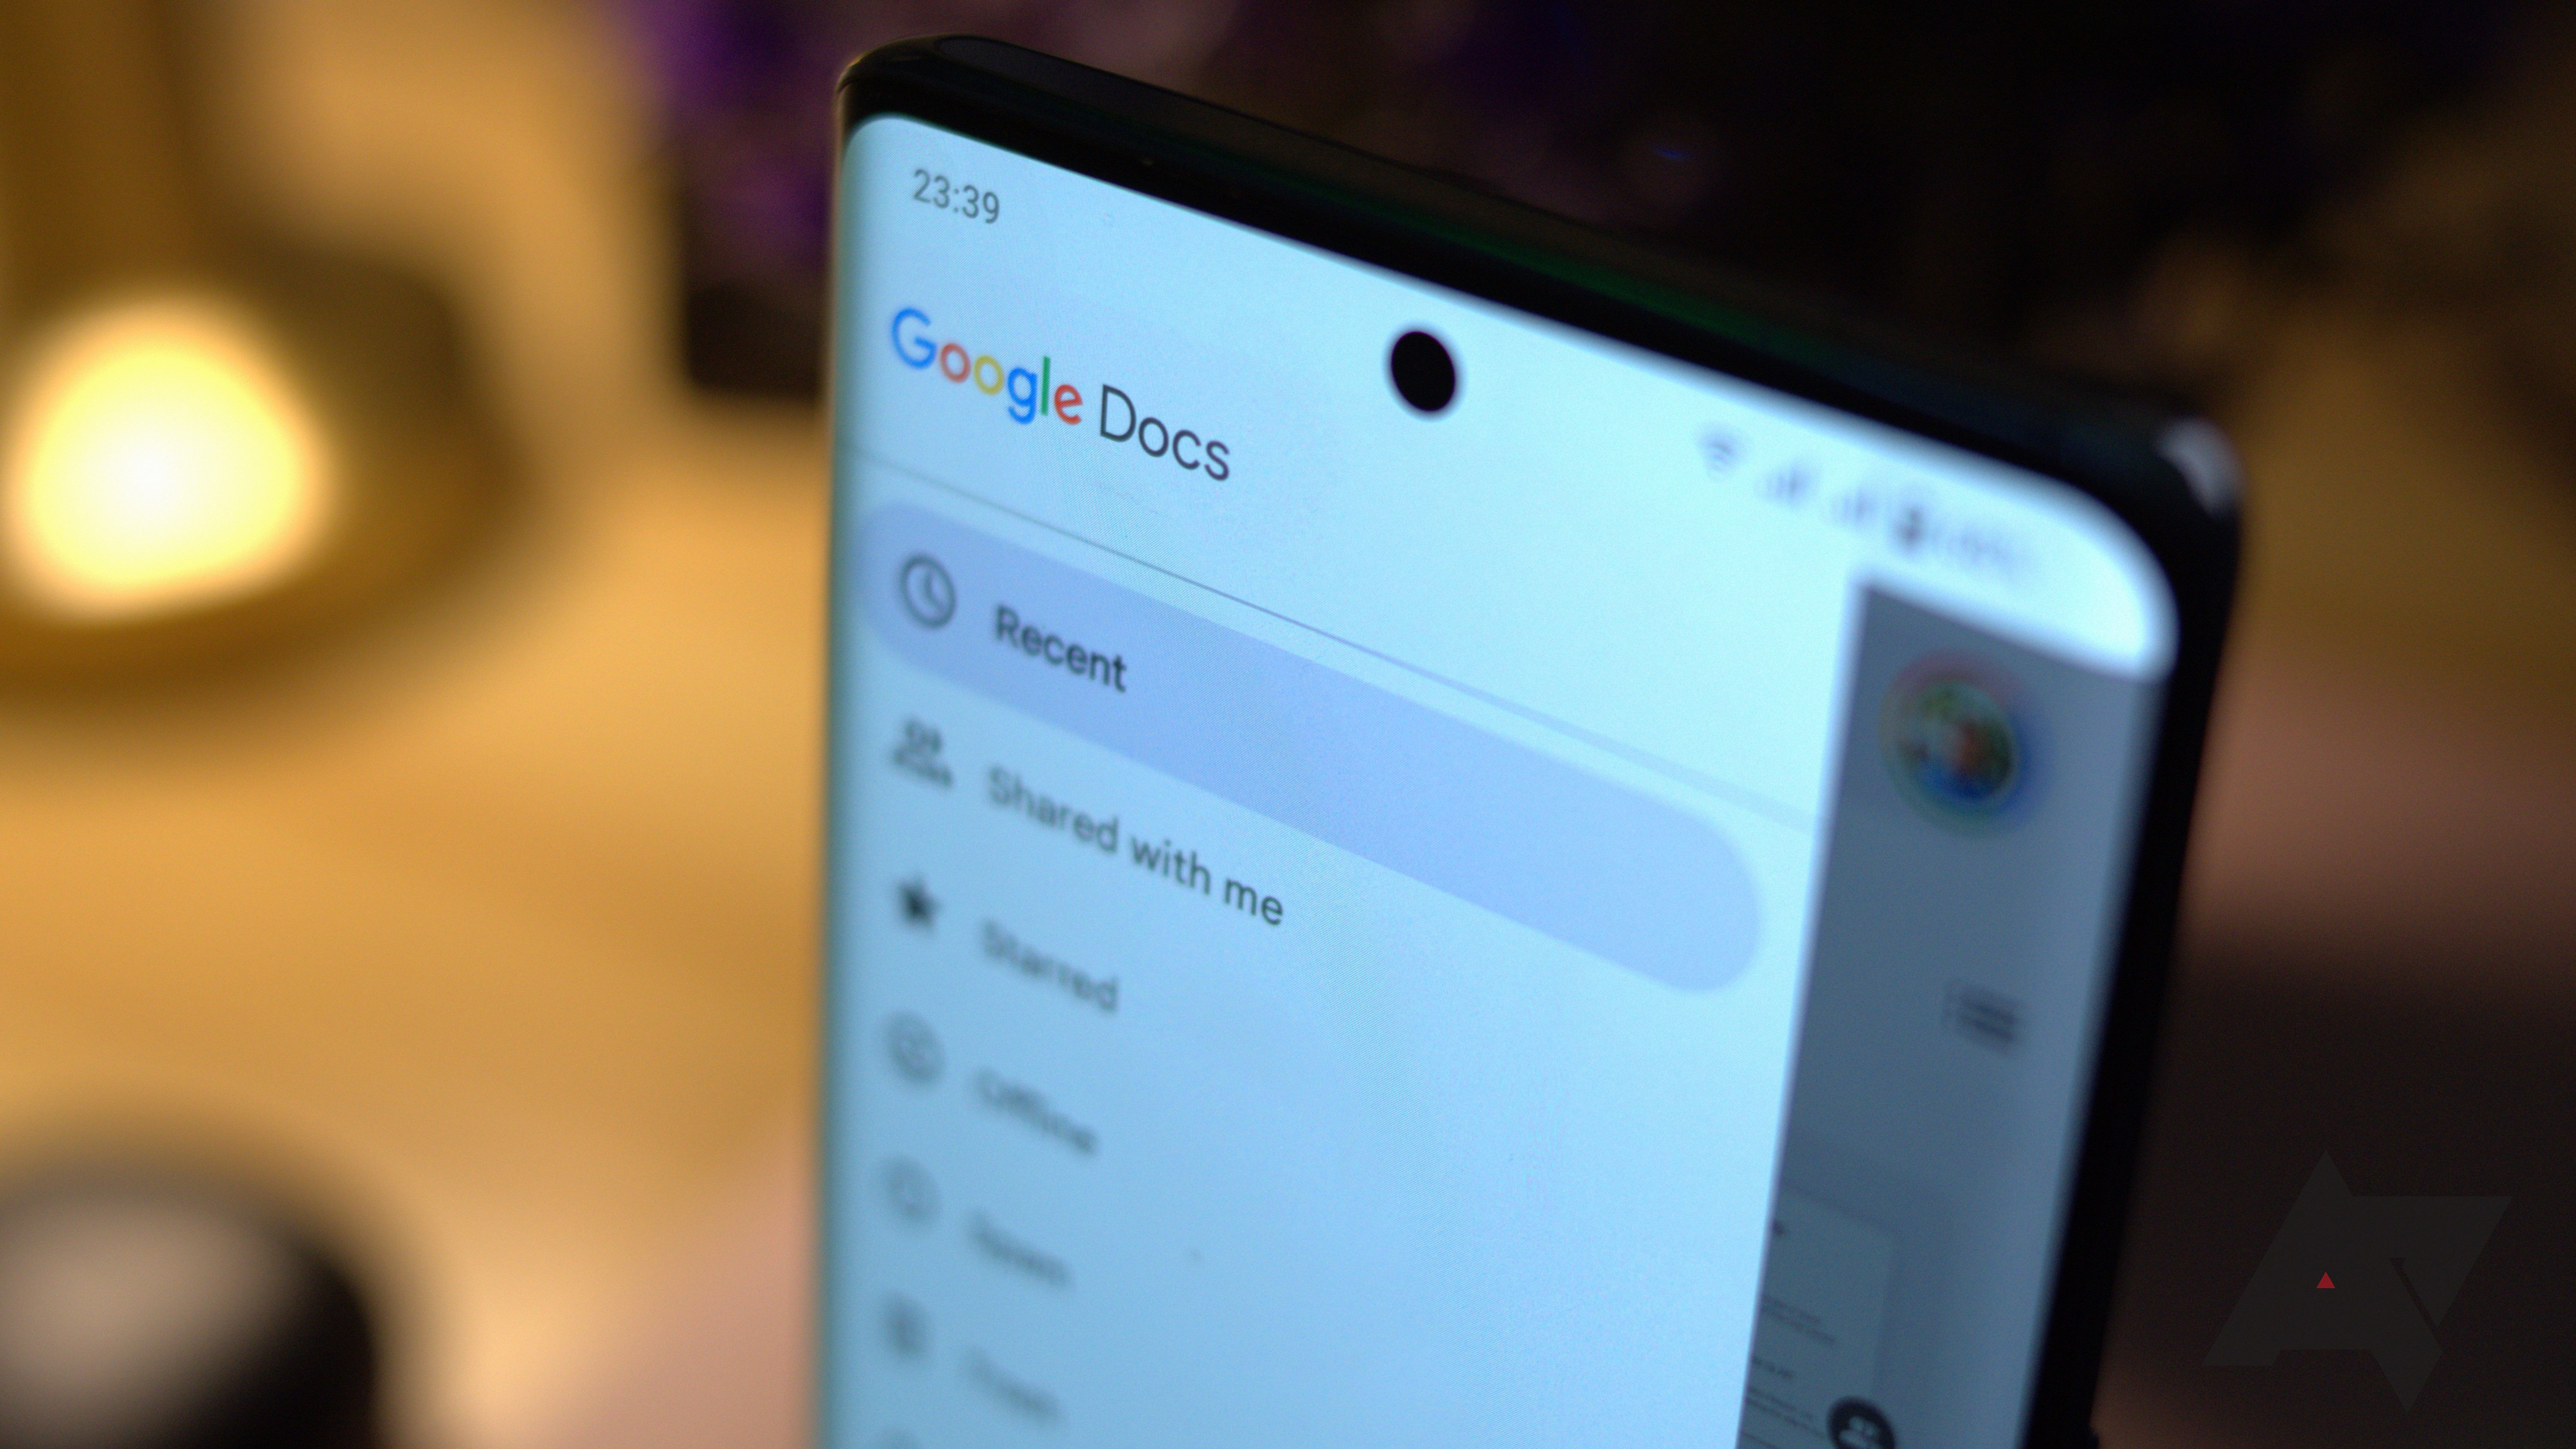 Google Docs overflow menu on an Android phone